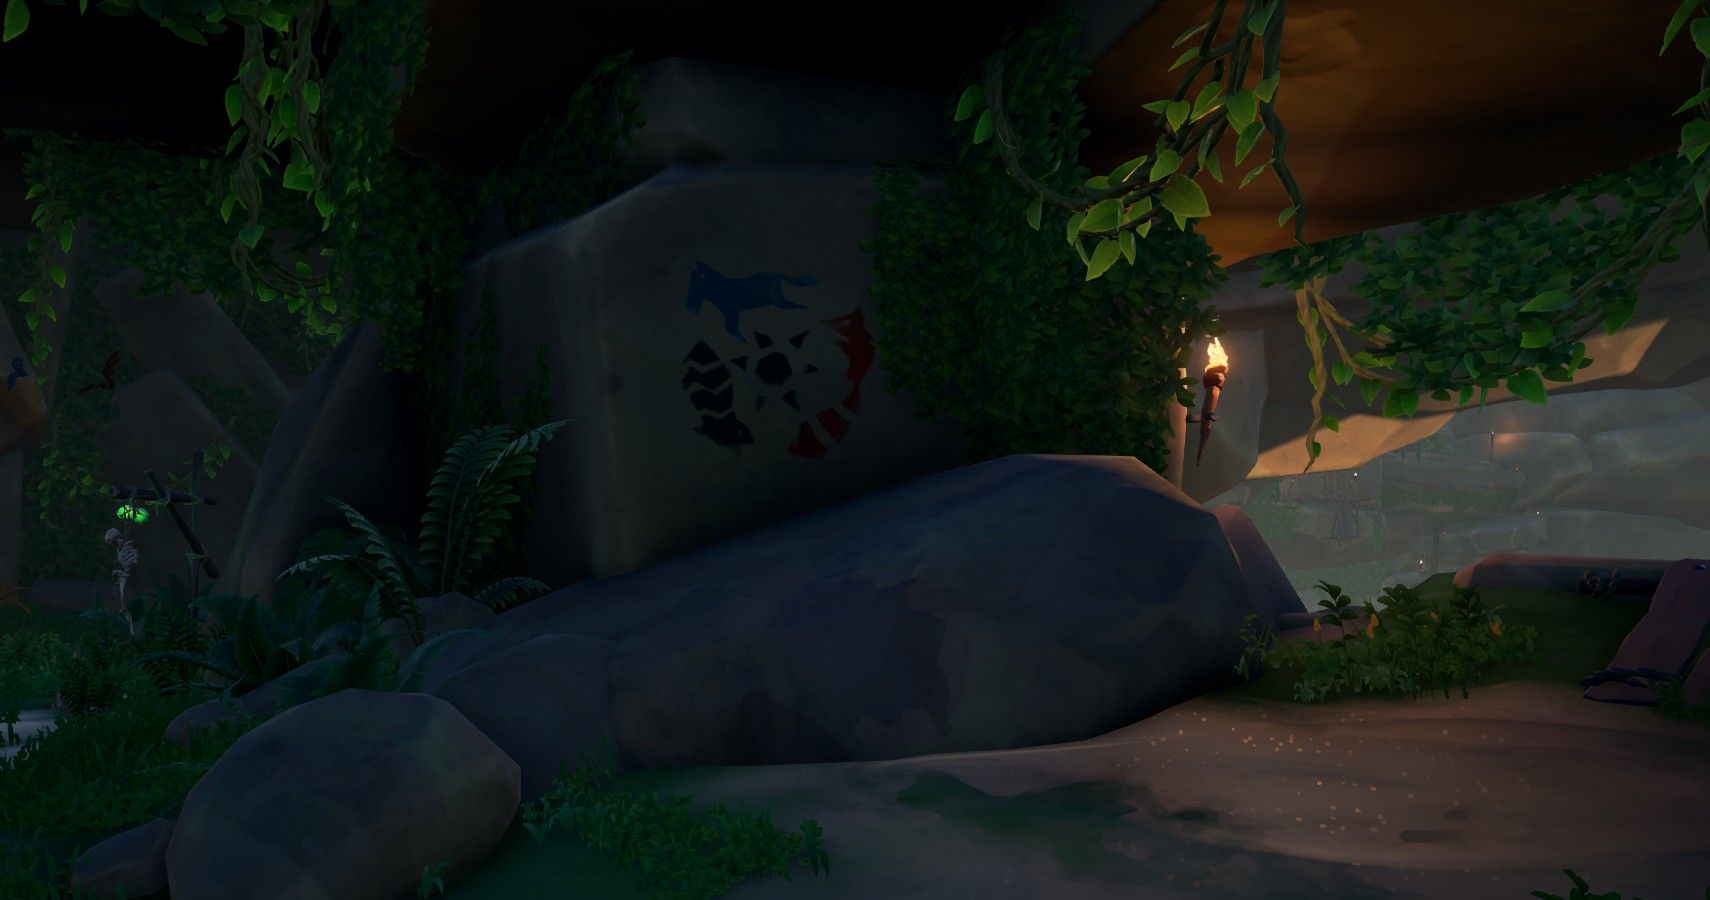 A unique painting on Thieves Haven in Sea of Thieves